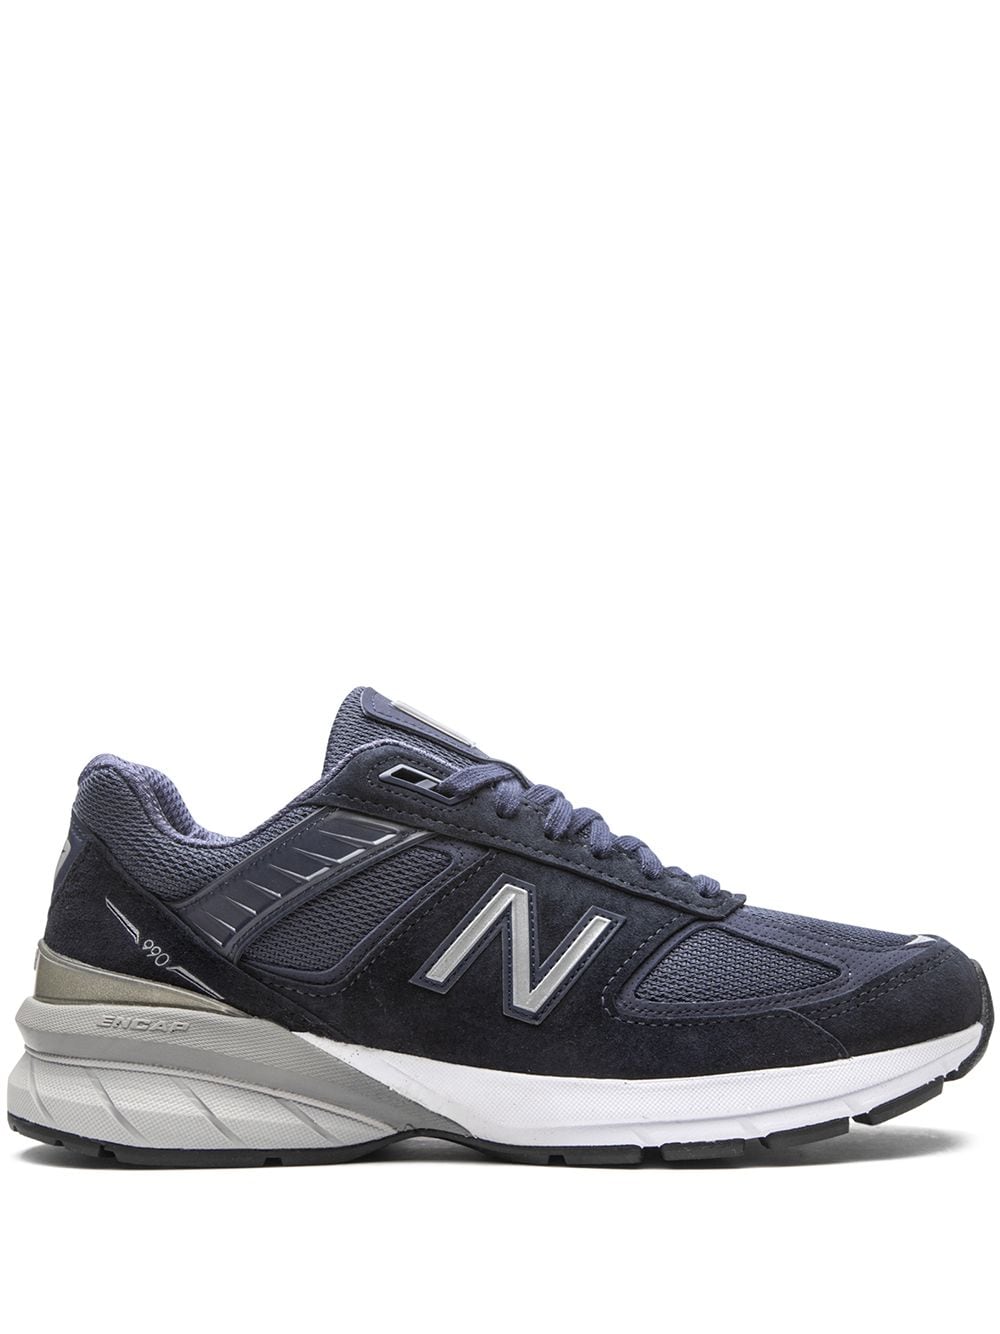 New Balance M990 "Navy" low-top sneakers - Blue